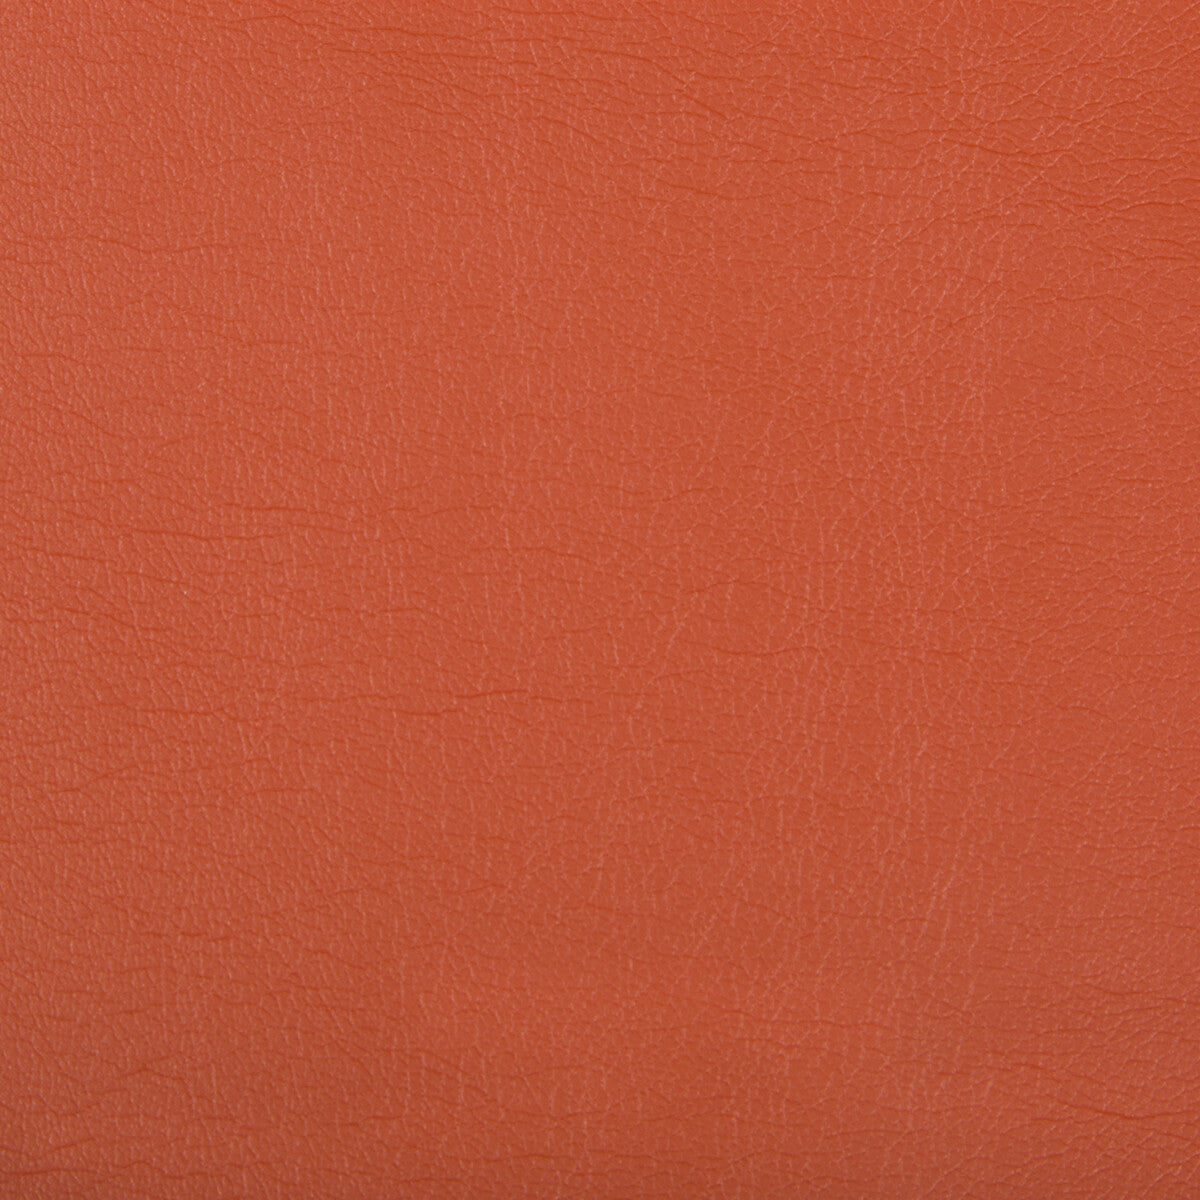 Optima fabric in nectarine color - pattern OPTIMA.12.0 - by Kravet Contract